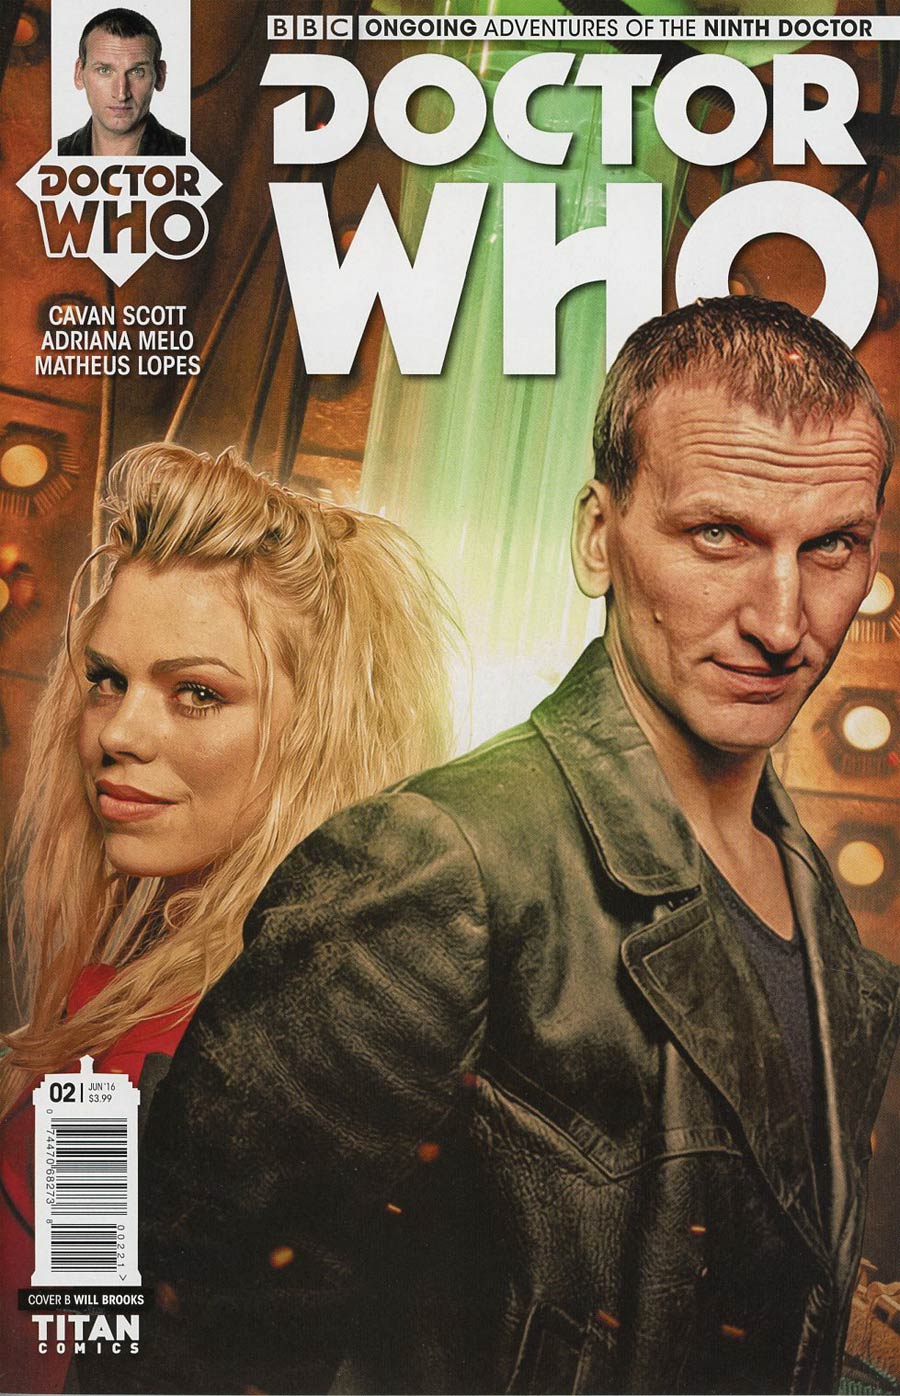 Doctor Who 9th Doctor Vol 2 #2 Cover B Variant Photo Cover